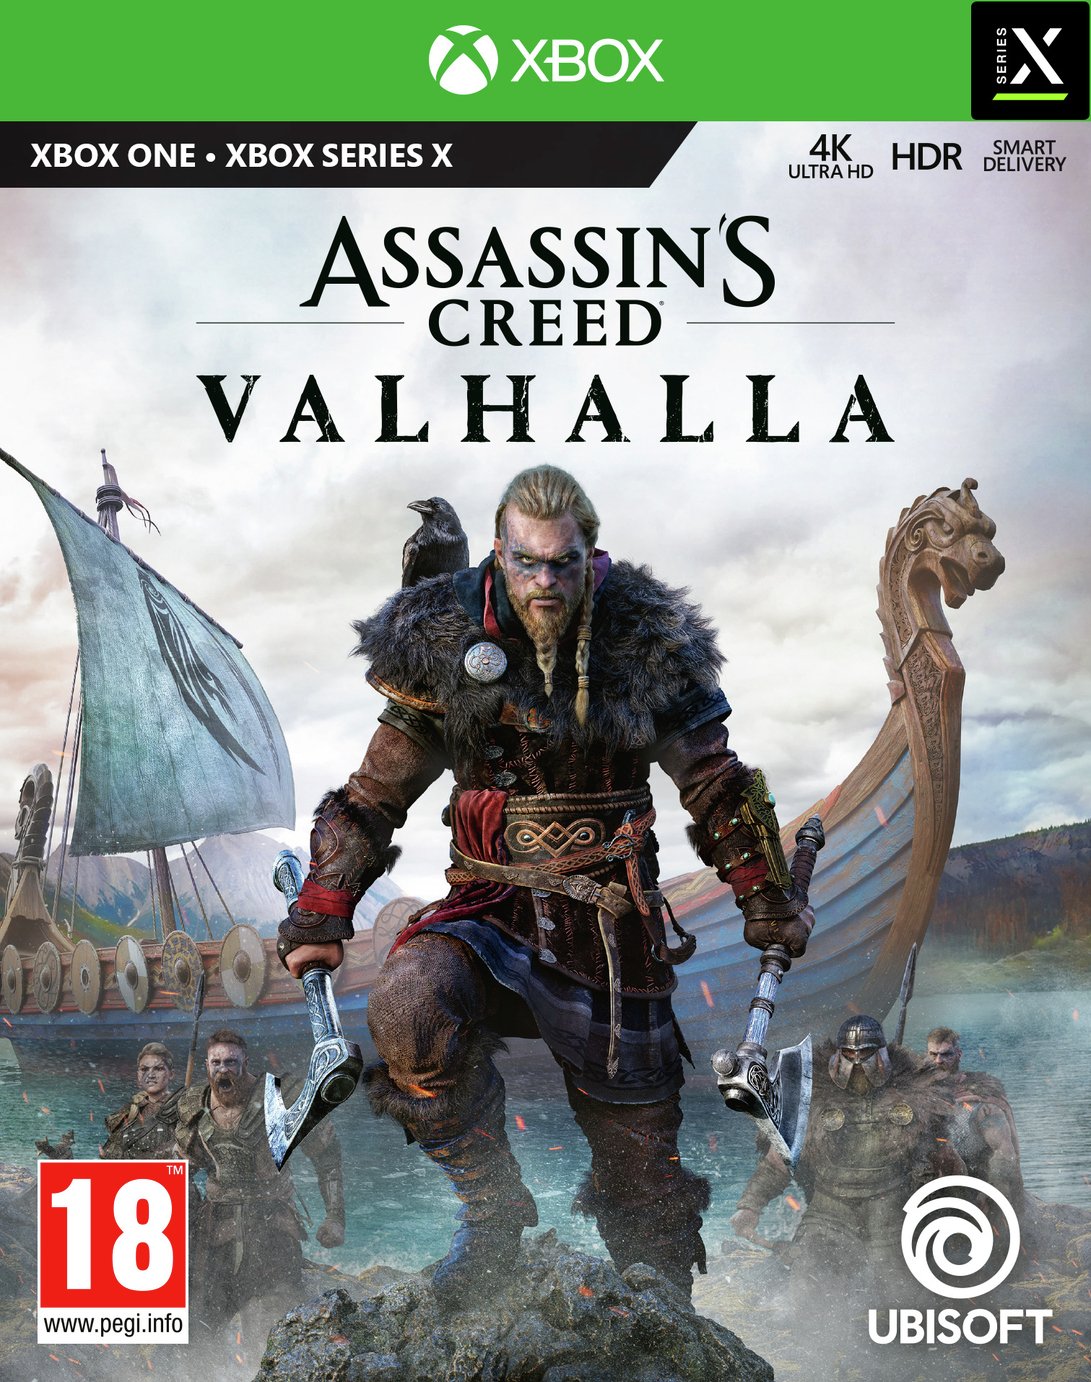 Assassin's Creed Valhalla Xbox One Game Pre-Order Review